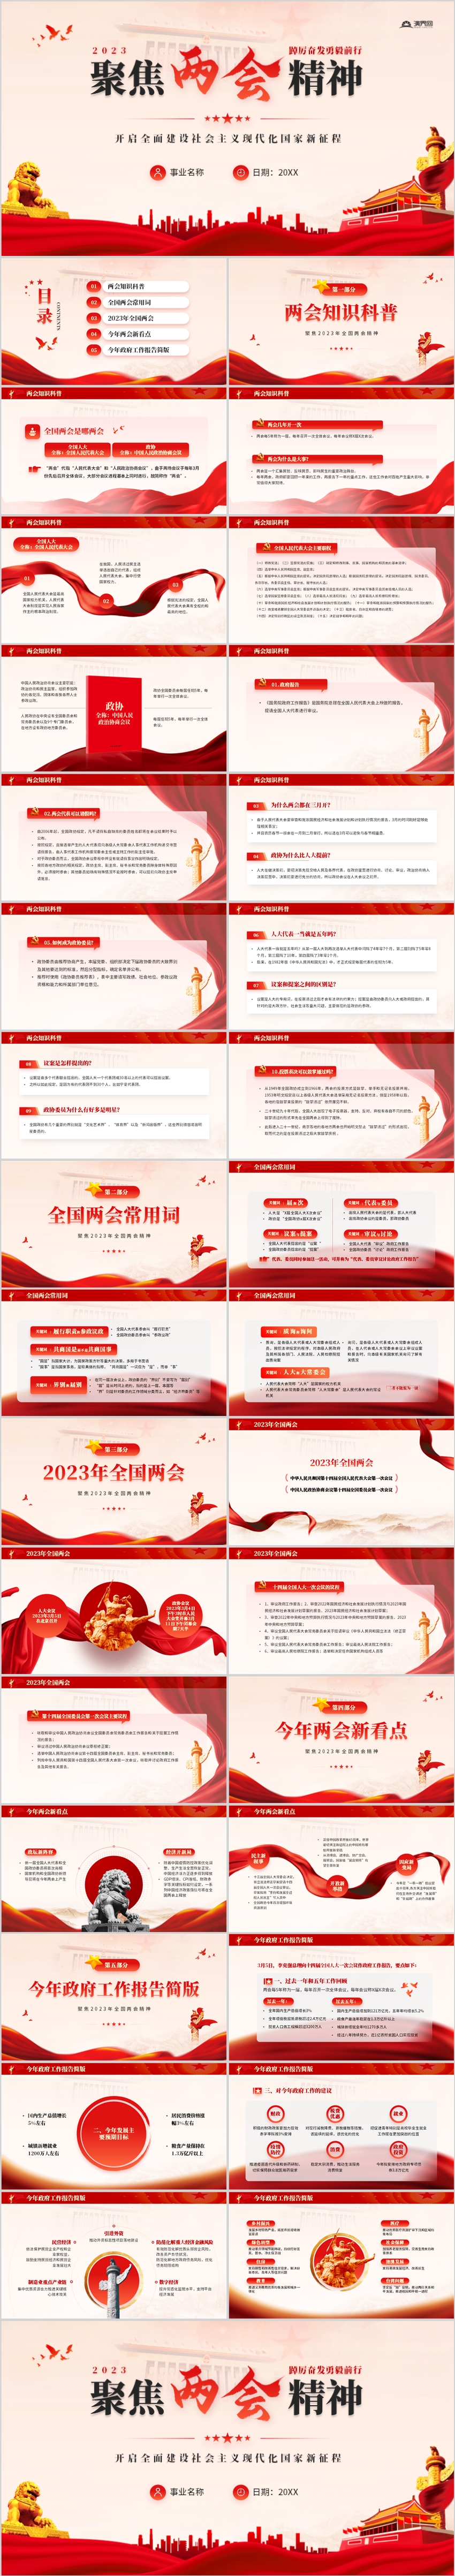  The red party's political style focuses on the spirit of the two sessions and interprets the PPT template